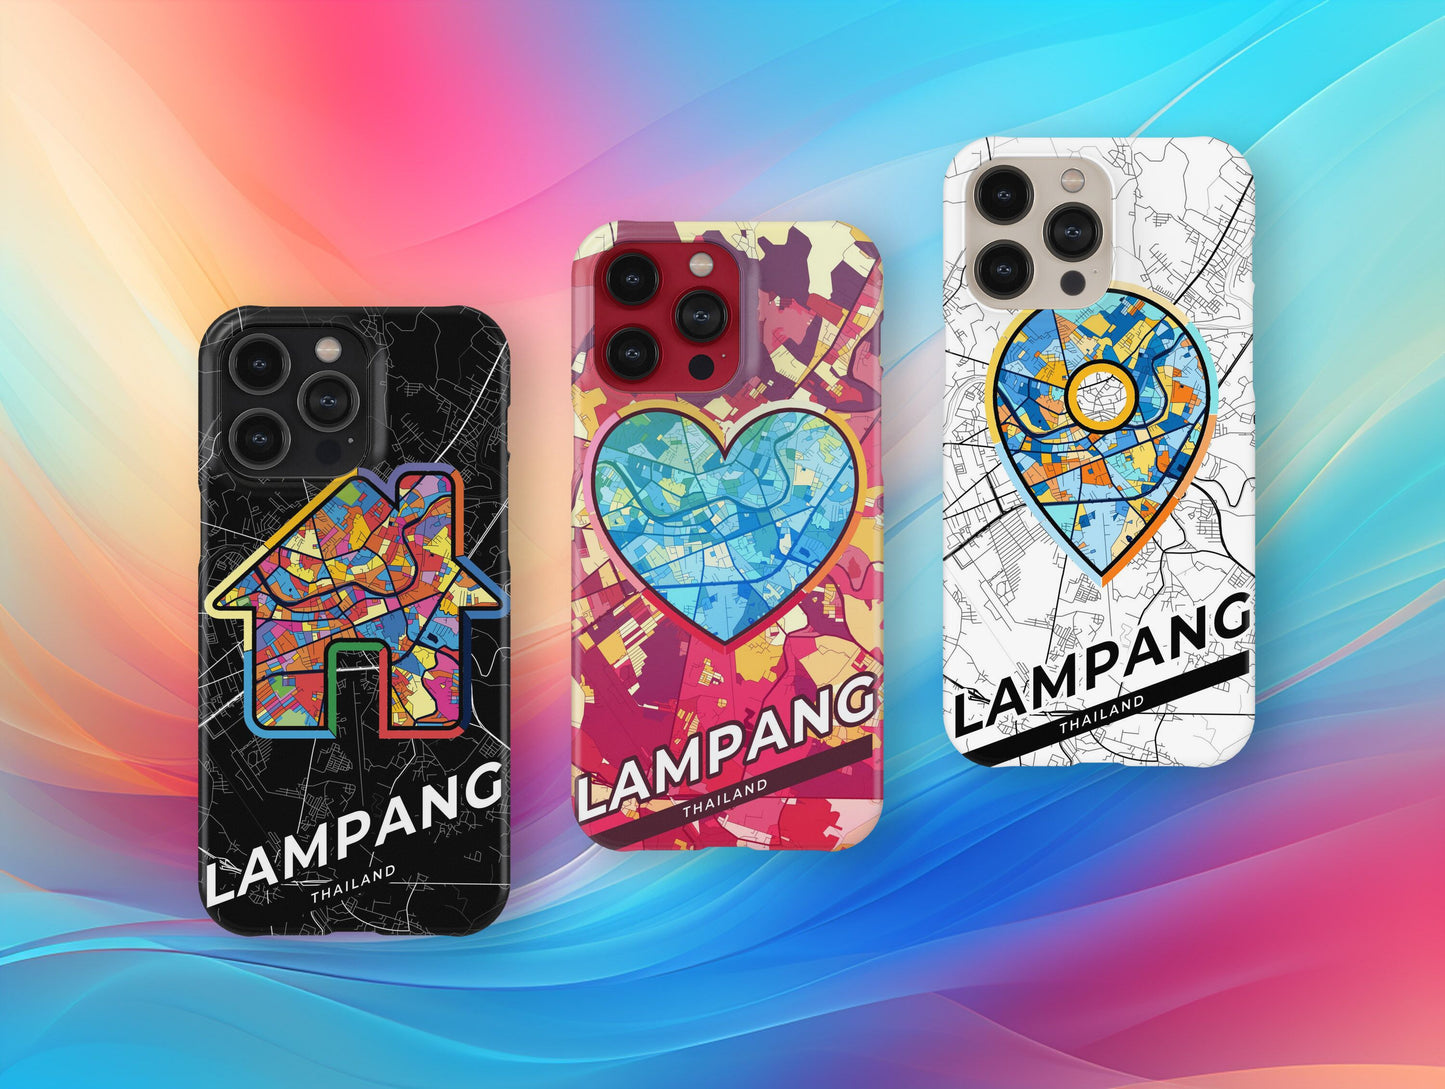 Lampang Thailand slim phone case with colorful icon. Birthday, wedding or housewarming gift. Couple match cases.